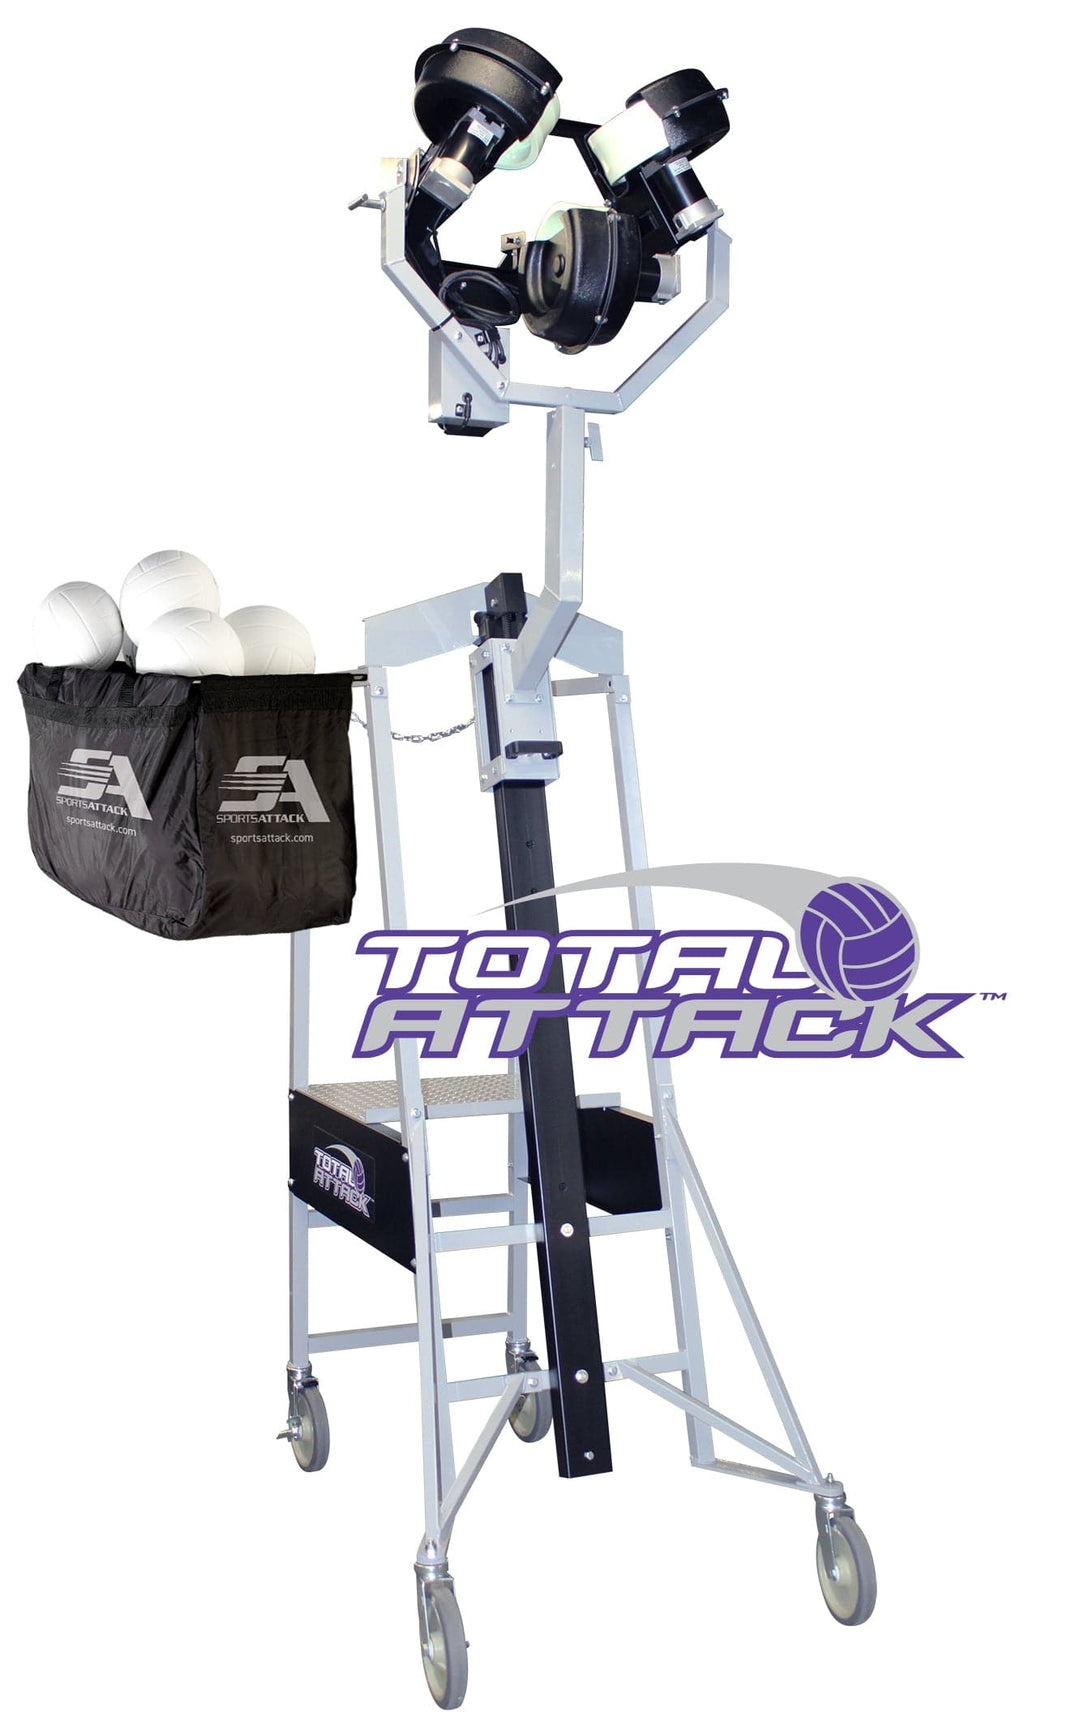 Sports Attack Machines and Accessories Total Attack Volleyball Machine | Sports Attack